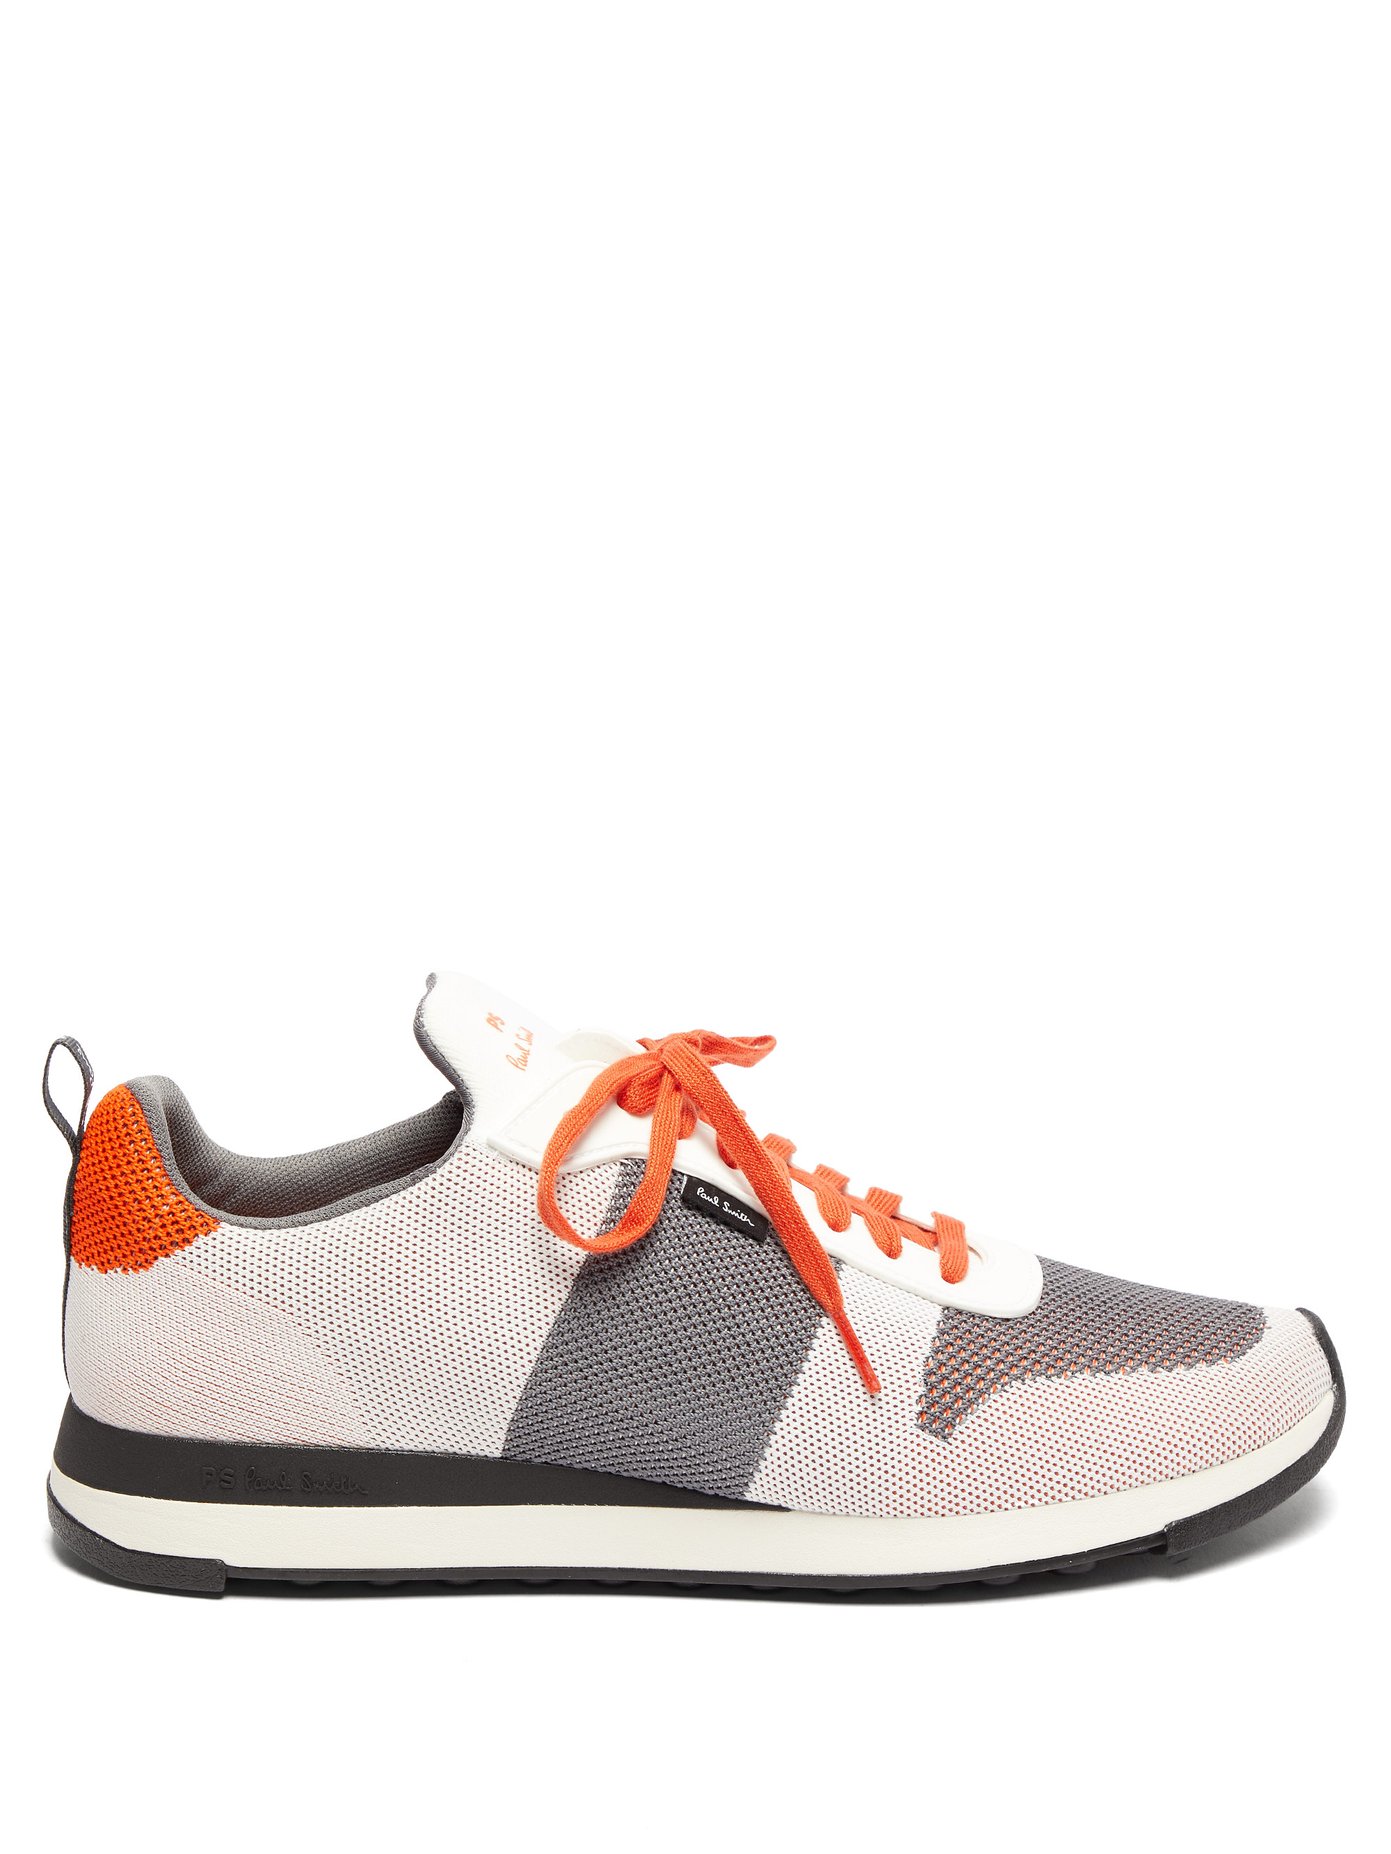 Rappid knit trainers | Paul Smith 